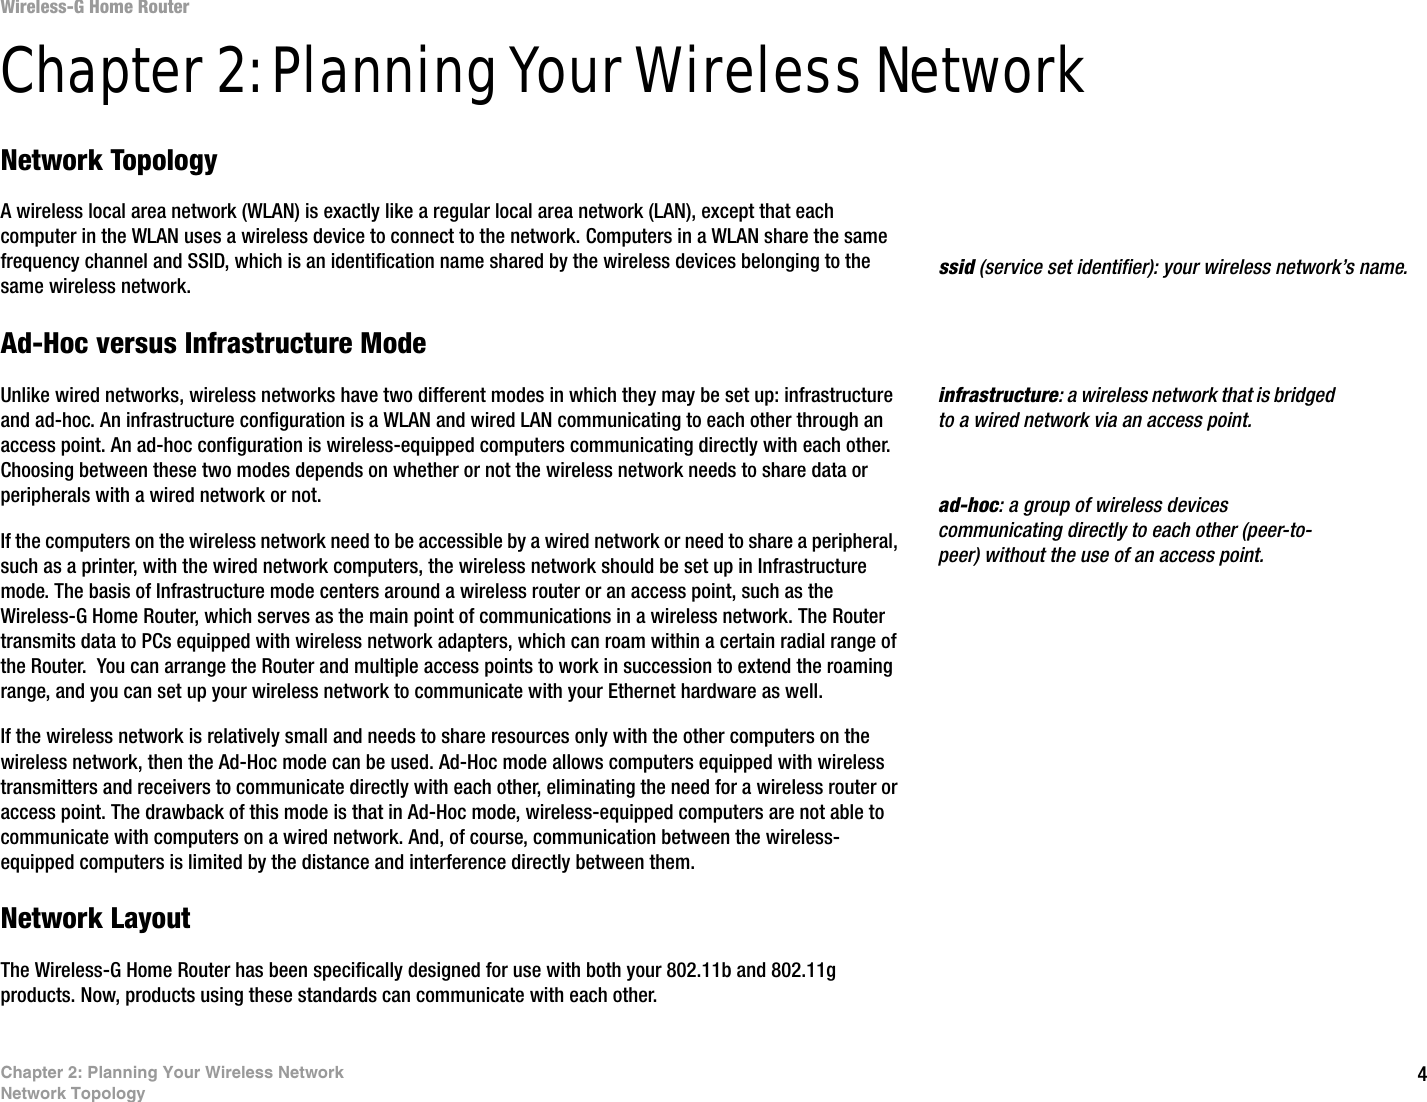 4Chapter 2: Planning Your Wireless NetworkNetwork TopologyWireless-G Home RouterChapter 2: Planning Your Wireless NetworkNetwork TopologyA wireless local area network (WLAN) is exactly like a regular local area network (LAN), except that each computer in the WLAN uses a wireless device to connect to the network. Computers in a WLAN share the same frequency channel and SSID, which is an identification name shared by the wireless devices belonging to the same wireless network.Ad-Hoc versus Infrastructure ModeUnlike wired networks, wireless networks have two different modes in which they may be set up: infrastructure and ad-hoc. An infrastructure configuration is a WLAN and wired LAN communicating to each other through an access point. An ad-hoc configuration is wireless-equipped computers communicating directly with each other. Choosing between these two modes depends on whether or not the wireless network needs to share data or peripherals with a wired network or not. If the computers on the wireless network need to be accessible by a wired network or need to share a peripheral, such as a printer, with the wired network computers, the wireless network should be set up in Infrastructure mode. The basis of Infrastructure mode centers around a wireless router or an access point, such as the Wireless-G Home Router, which serves as the main point of communications in a wireless network. The Router transmits data to PCs equipped with wireless network adapters, which can roam within a certain radial range of the Router.  You can arrange the Router and multiple access points to work in succession to extend the roaming range, and you can set up your wireless network to communicate with your Ethernet hardware as well. If the wireless network is relatively small and needs to share resources only with the other computers on the wireless network, then the Ad-Hoc mode can be used. Ad-Hoc mode allows computers equipped with wireless transmitters and receivers to communicate directly with each other, eliminating the need for a wireless router or access point. The drawback of this mode is that in Ad-Hoc mode, wireless-equipped computers are not able to communicate with computers on a wired network. And, of course, communication between the wireless-equipped computers is limited by the distance and interference directly between them. Network LayoutThe Wireless-G Home Router has been specifically designed for use with both your 802.11b and 802.11g products. Now, products using these standards can communicate with each other.infrastructure: a wireless network that is bridged to a wired network via an access point.ssid (service set identifier): your wireless network’s name.ad-hoc: a group of wireless devices communicating directly to each other (peer-to-peer) without the use of an access point.